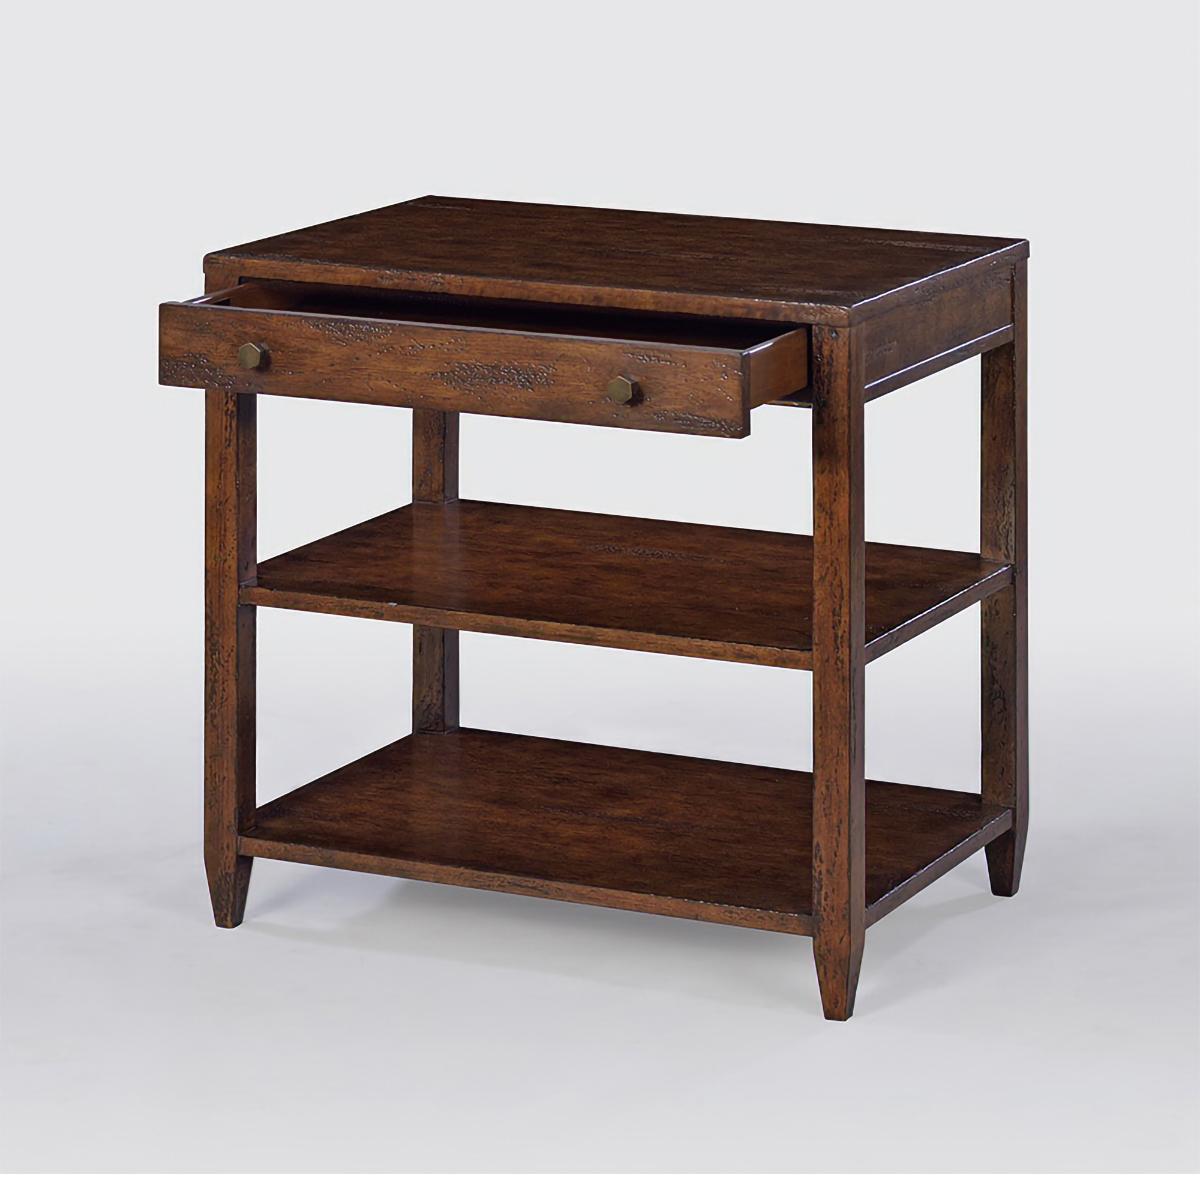 Classic wide rectangle side table with a drawer, two shelves, brass hardware, and tapered feet, has a “country” mahogany wood tone with natural highlights.

Dimensions: 26